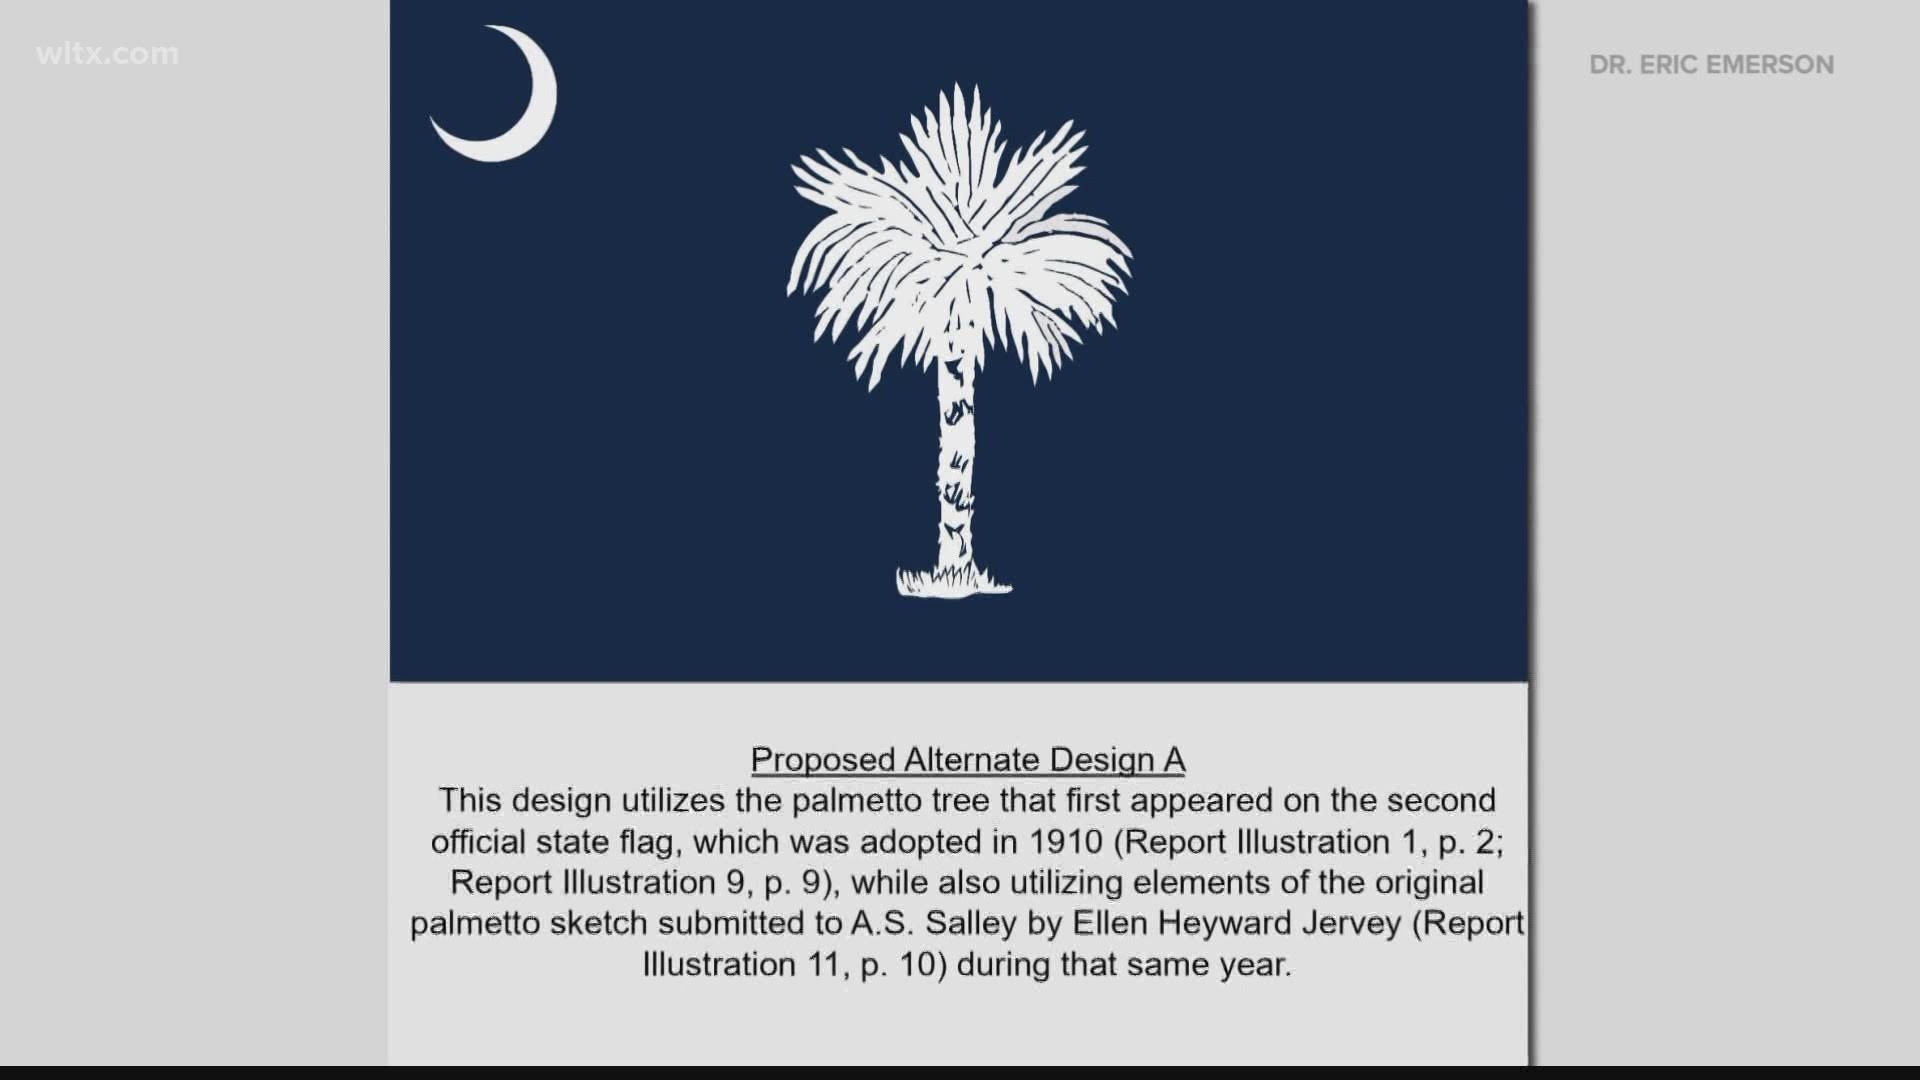 The design would set a design standard, which South Carolina currently lacks.